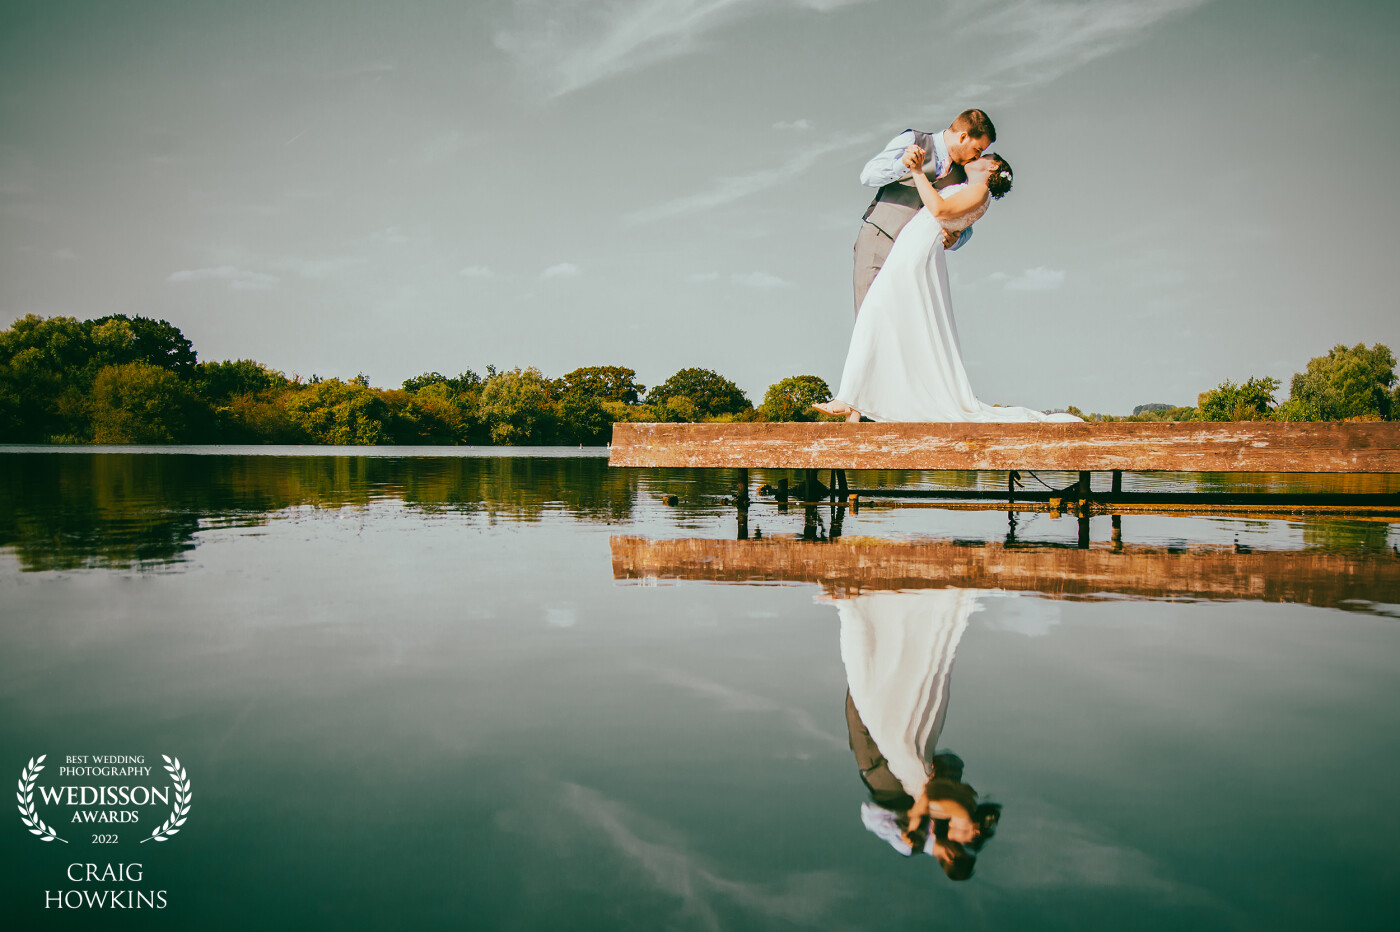 This photo was taken at Grendon Lakes in Northamptonshire. We had the perfect calm water and the bride and groom just embraced each other in this lovely moment which gives the image a hint of the silver screen.